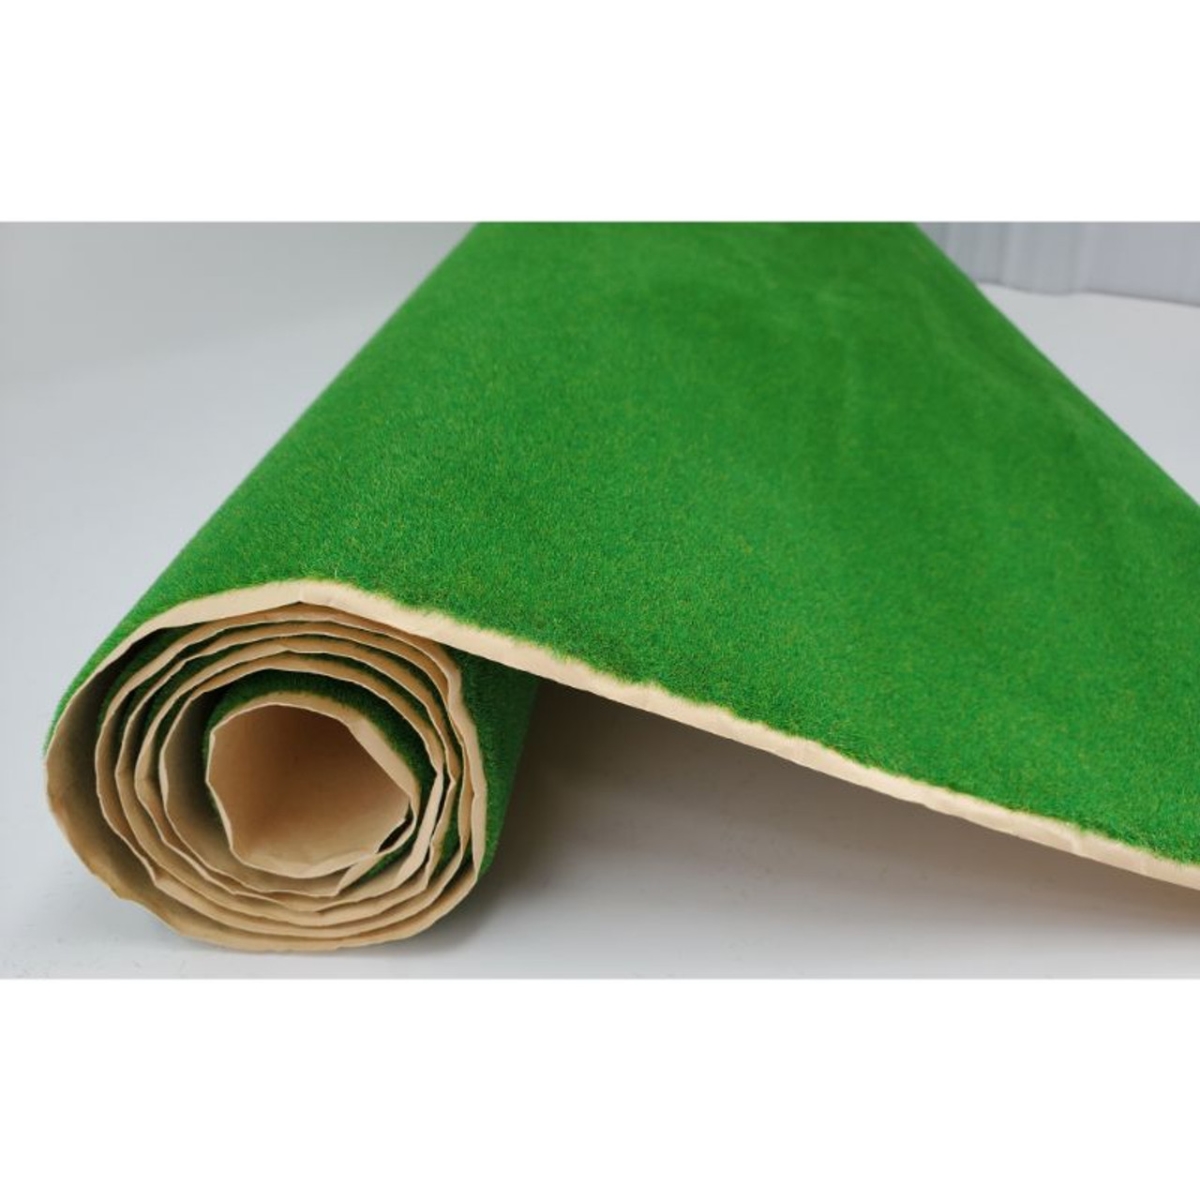 Picture of Rock Island Hobby RIH024403 19 x 49 in. Multi Scale Grass Mat, Summer Green